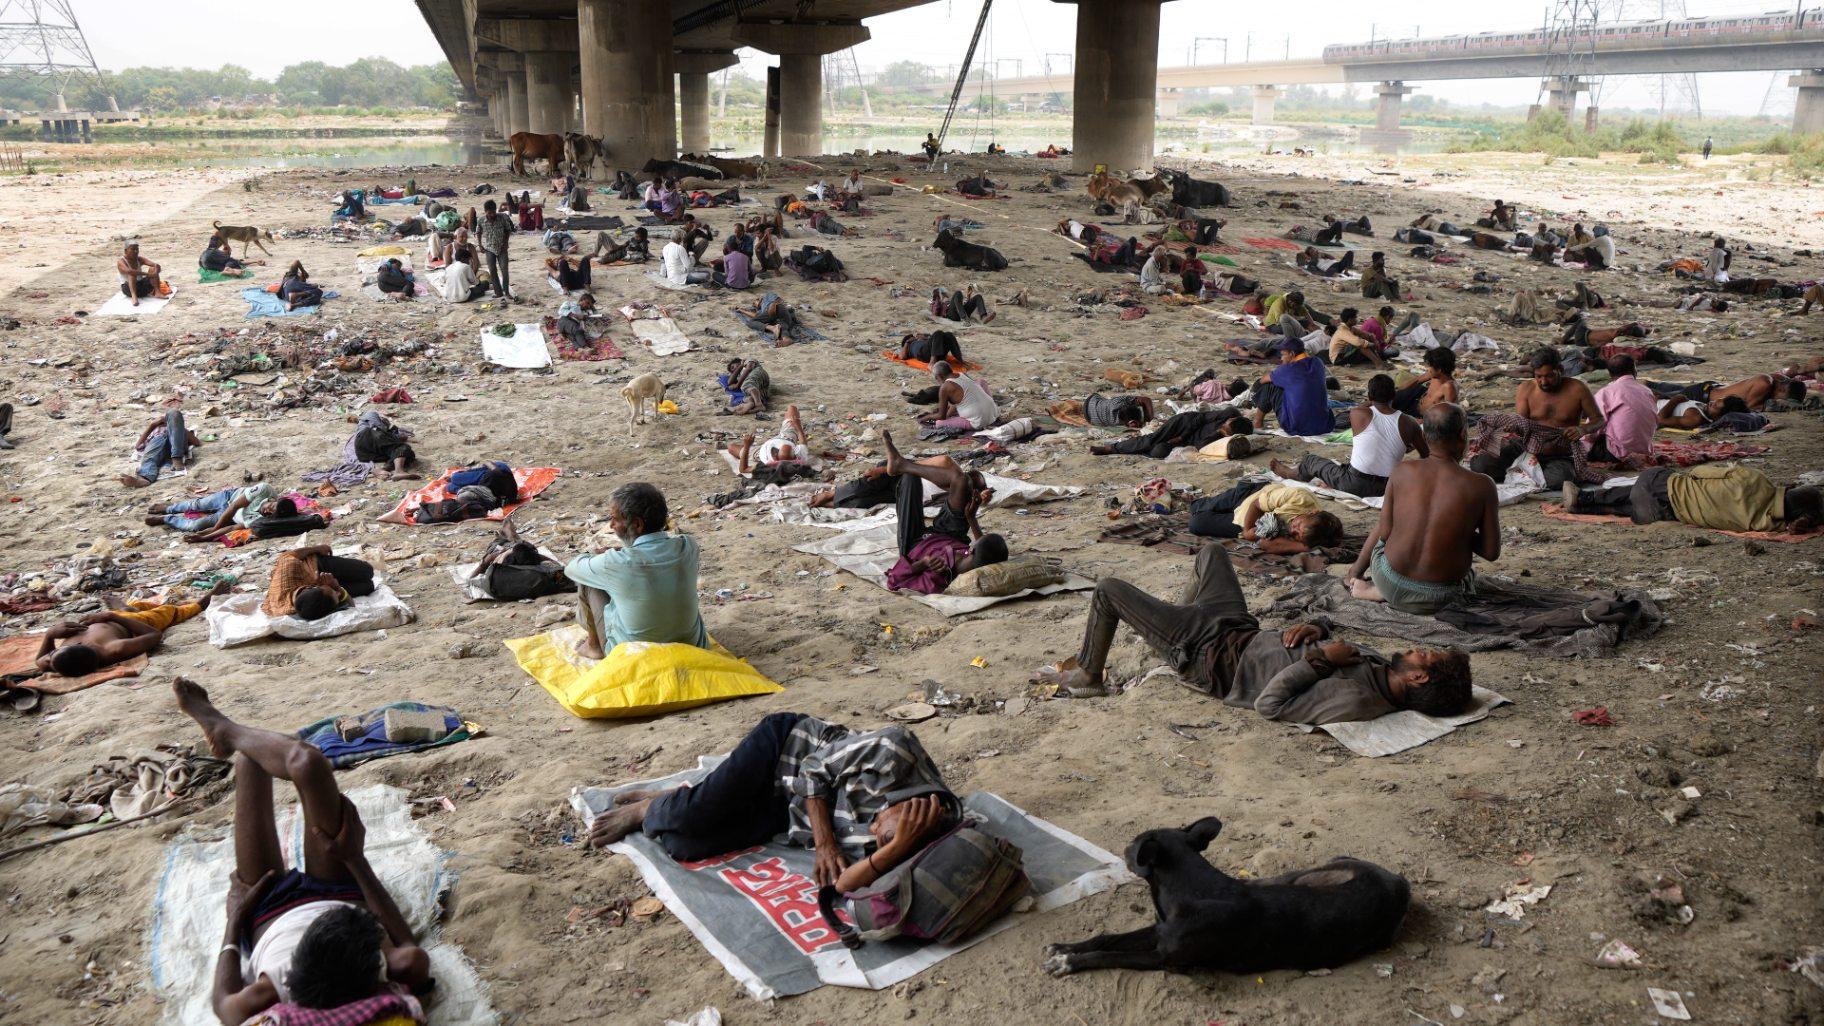 Homeless people sleep in the shade of a bridge on a hot day in New Delhi, May 20, 2022. (AP Photo / Manish Swarup, File)